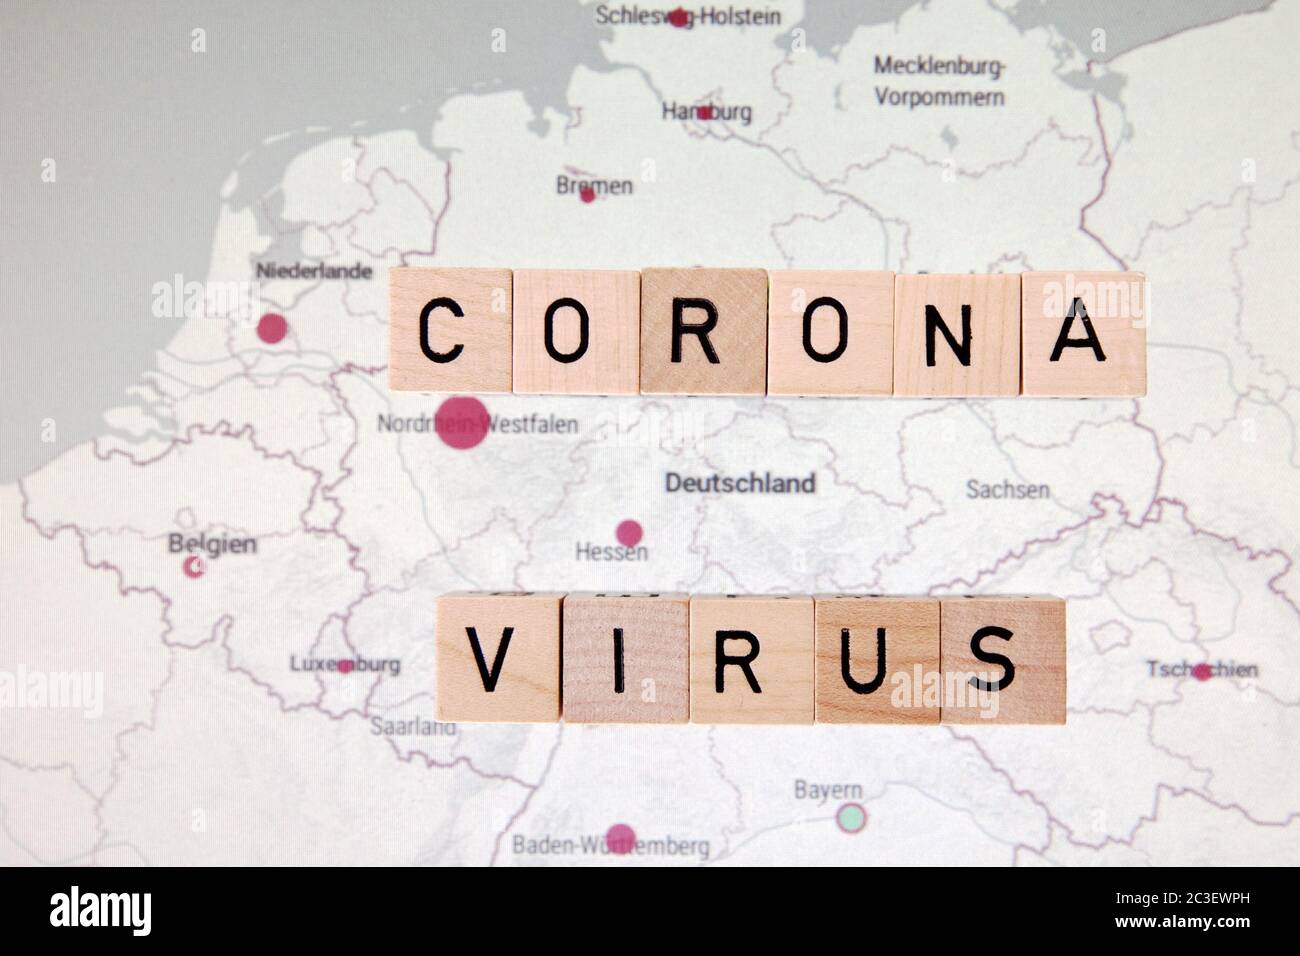 Map with the spread of the corona virus in Germany, 02.03.2020, Corona crisis, symbolic picture Stock Photo